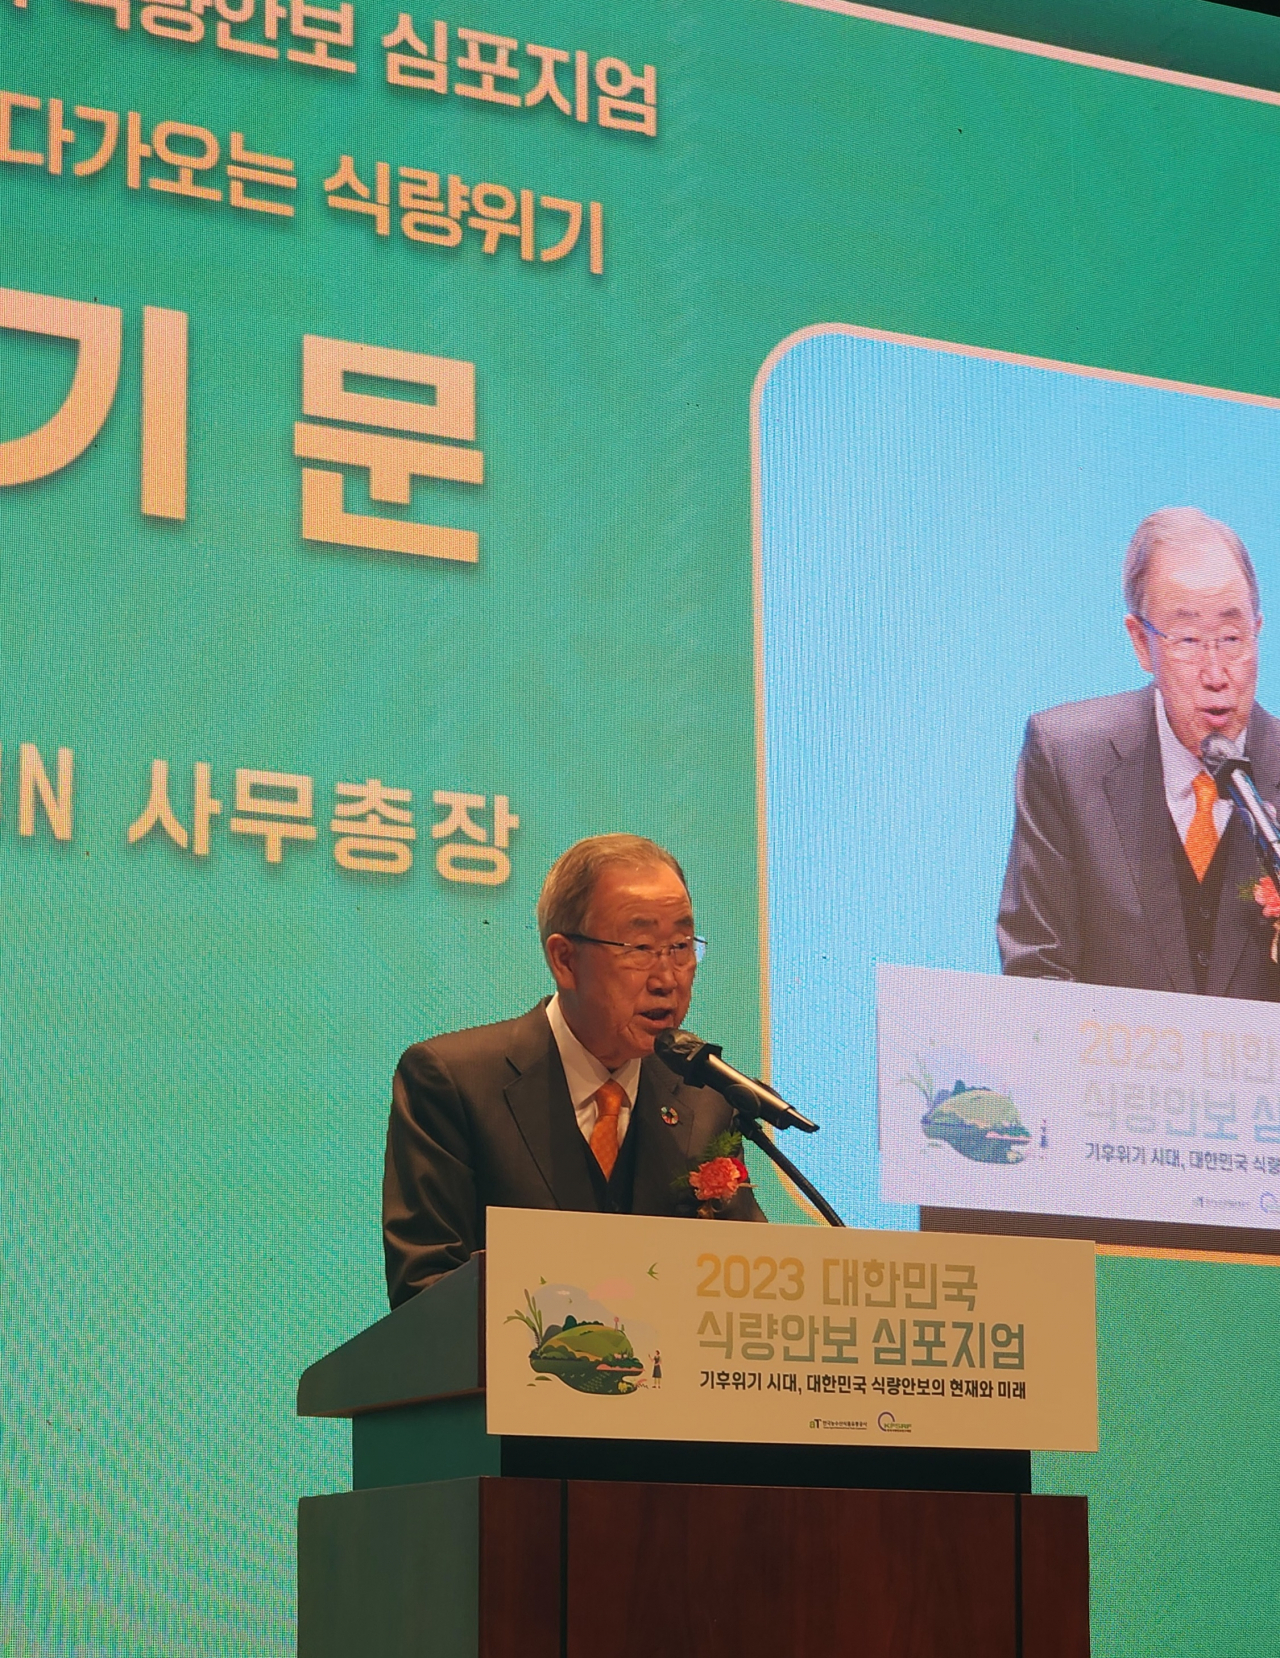 Ban Ki-moon, former secretary-general of the United Nations, delivers a special keynote speech at the 2023Korea Food Security Symposium in Seoul, Friday. (Korea Agro-Fisheries & Food Trade Corp.)